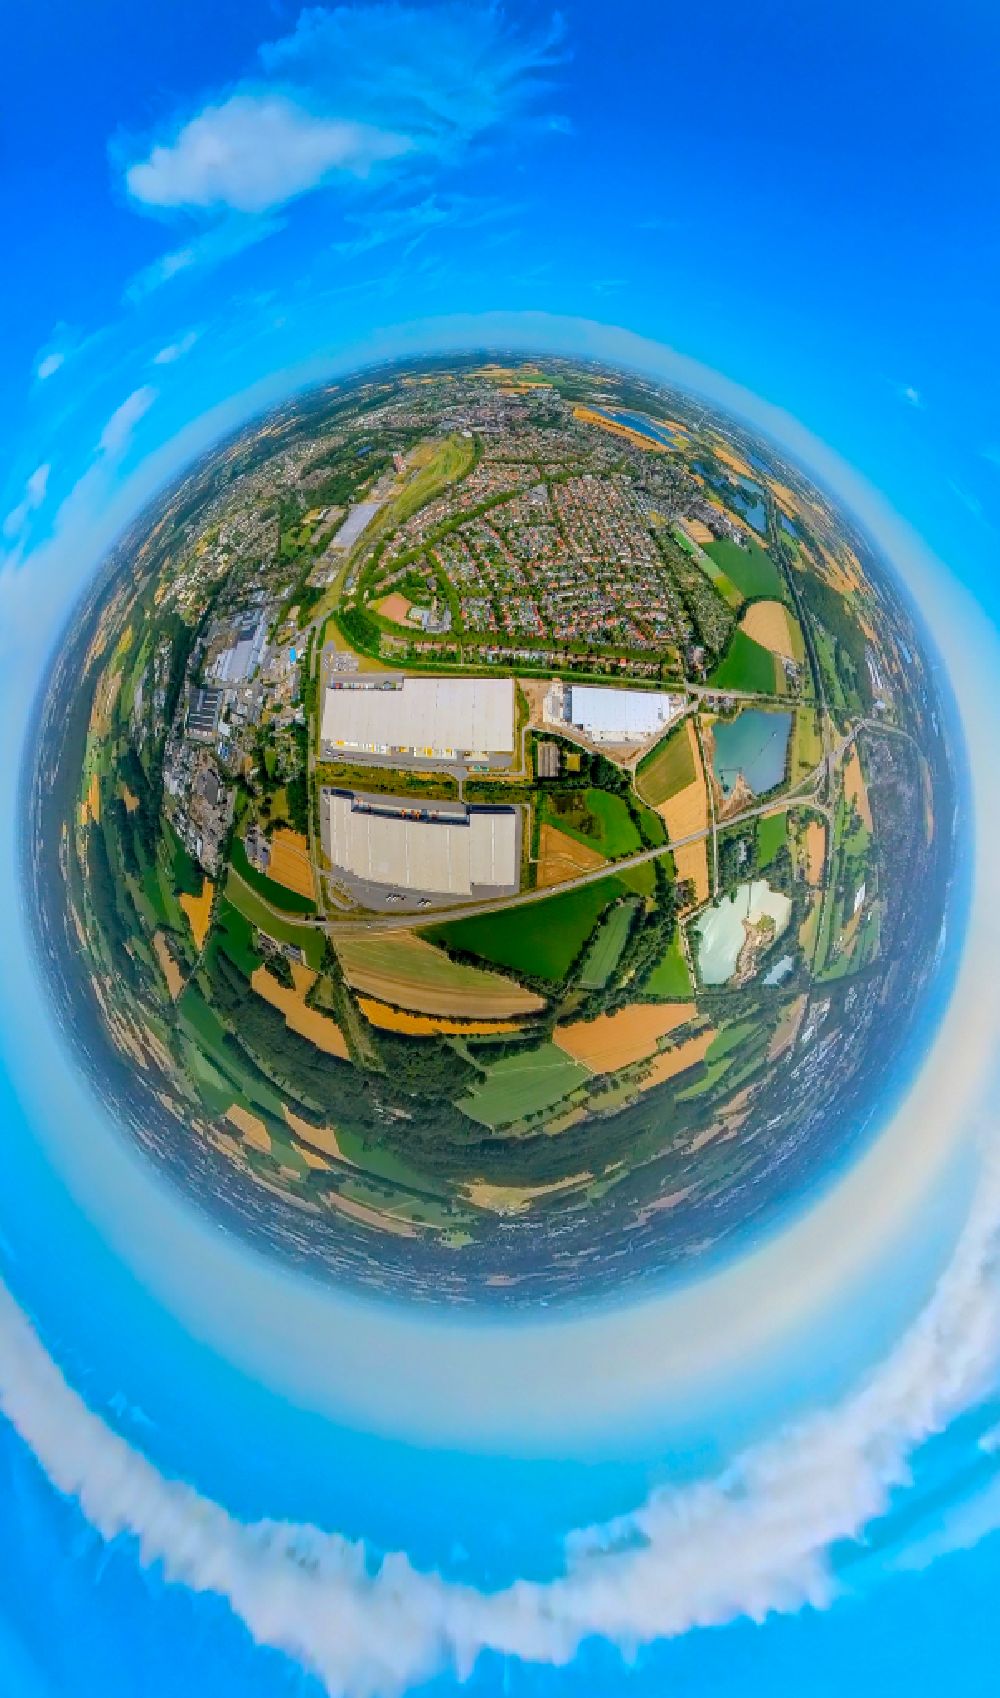 Kamp-Lintfort from the bird's eye view: Fisheye perspective building complex and distribution center on the site on Norddeutschlandstrasse in the district Niersenbruch in Kamp-Lintfort at Ruhrgebiet in the state North Rhine-Westphalia, Germany